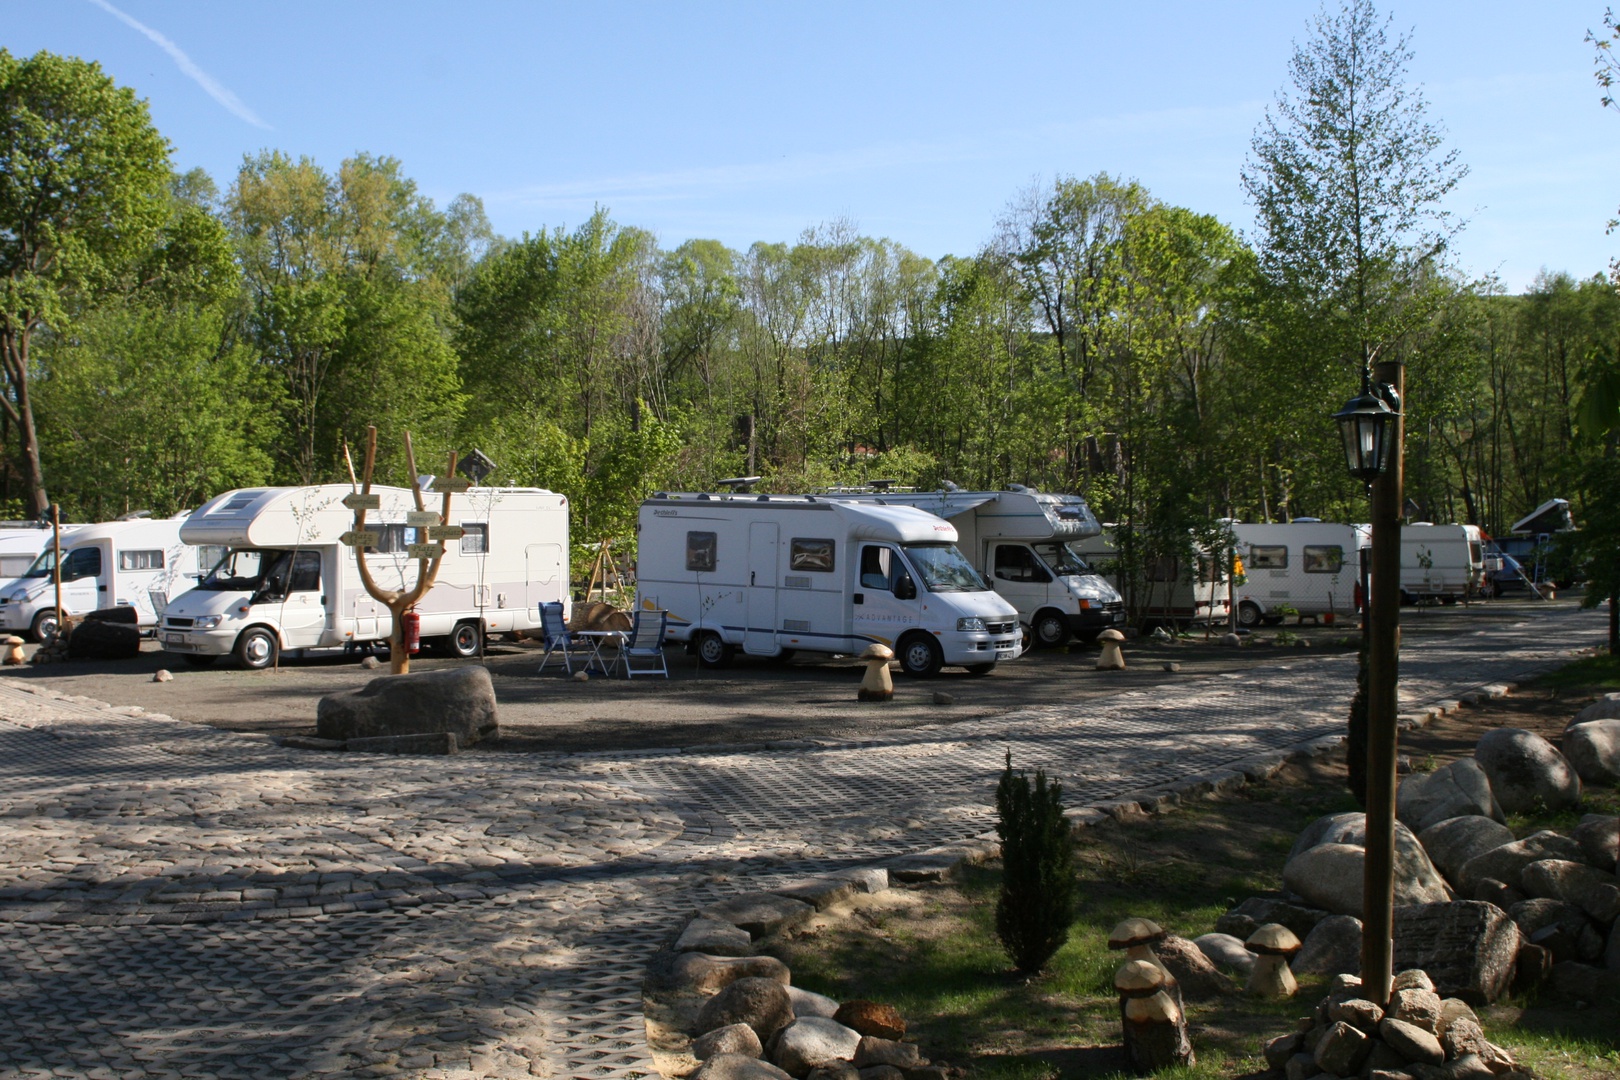 Klostercamping Thale